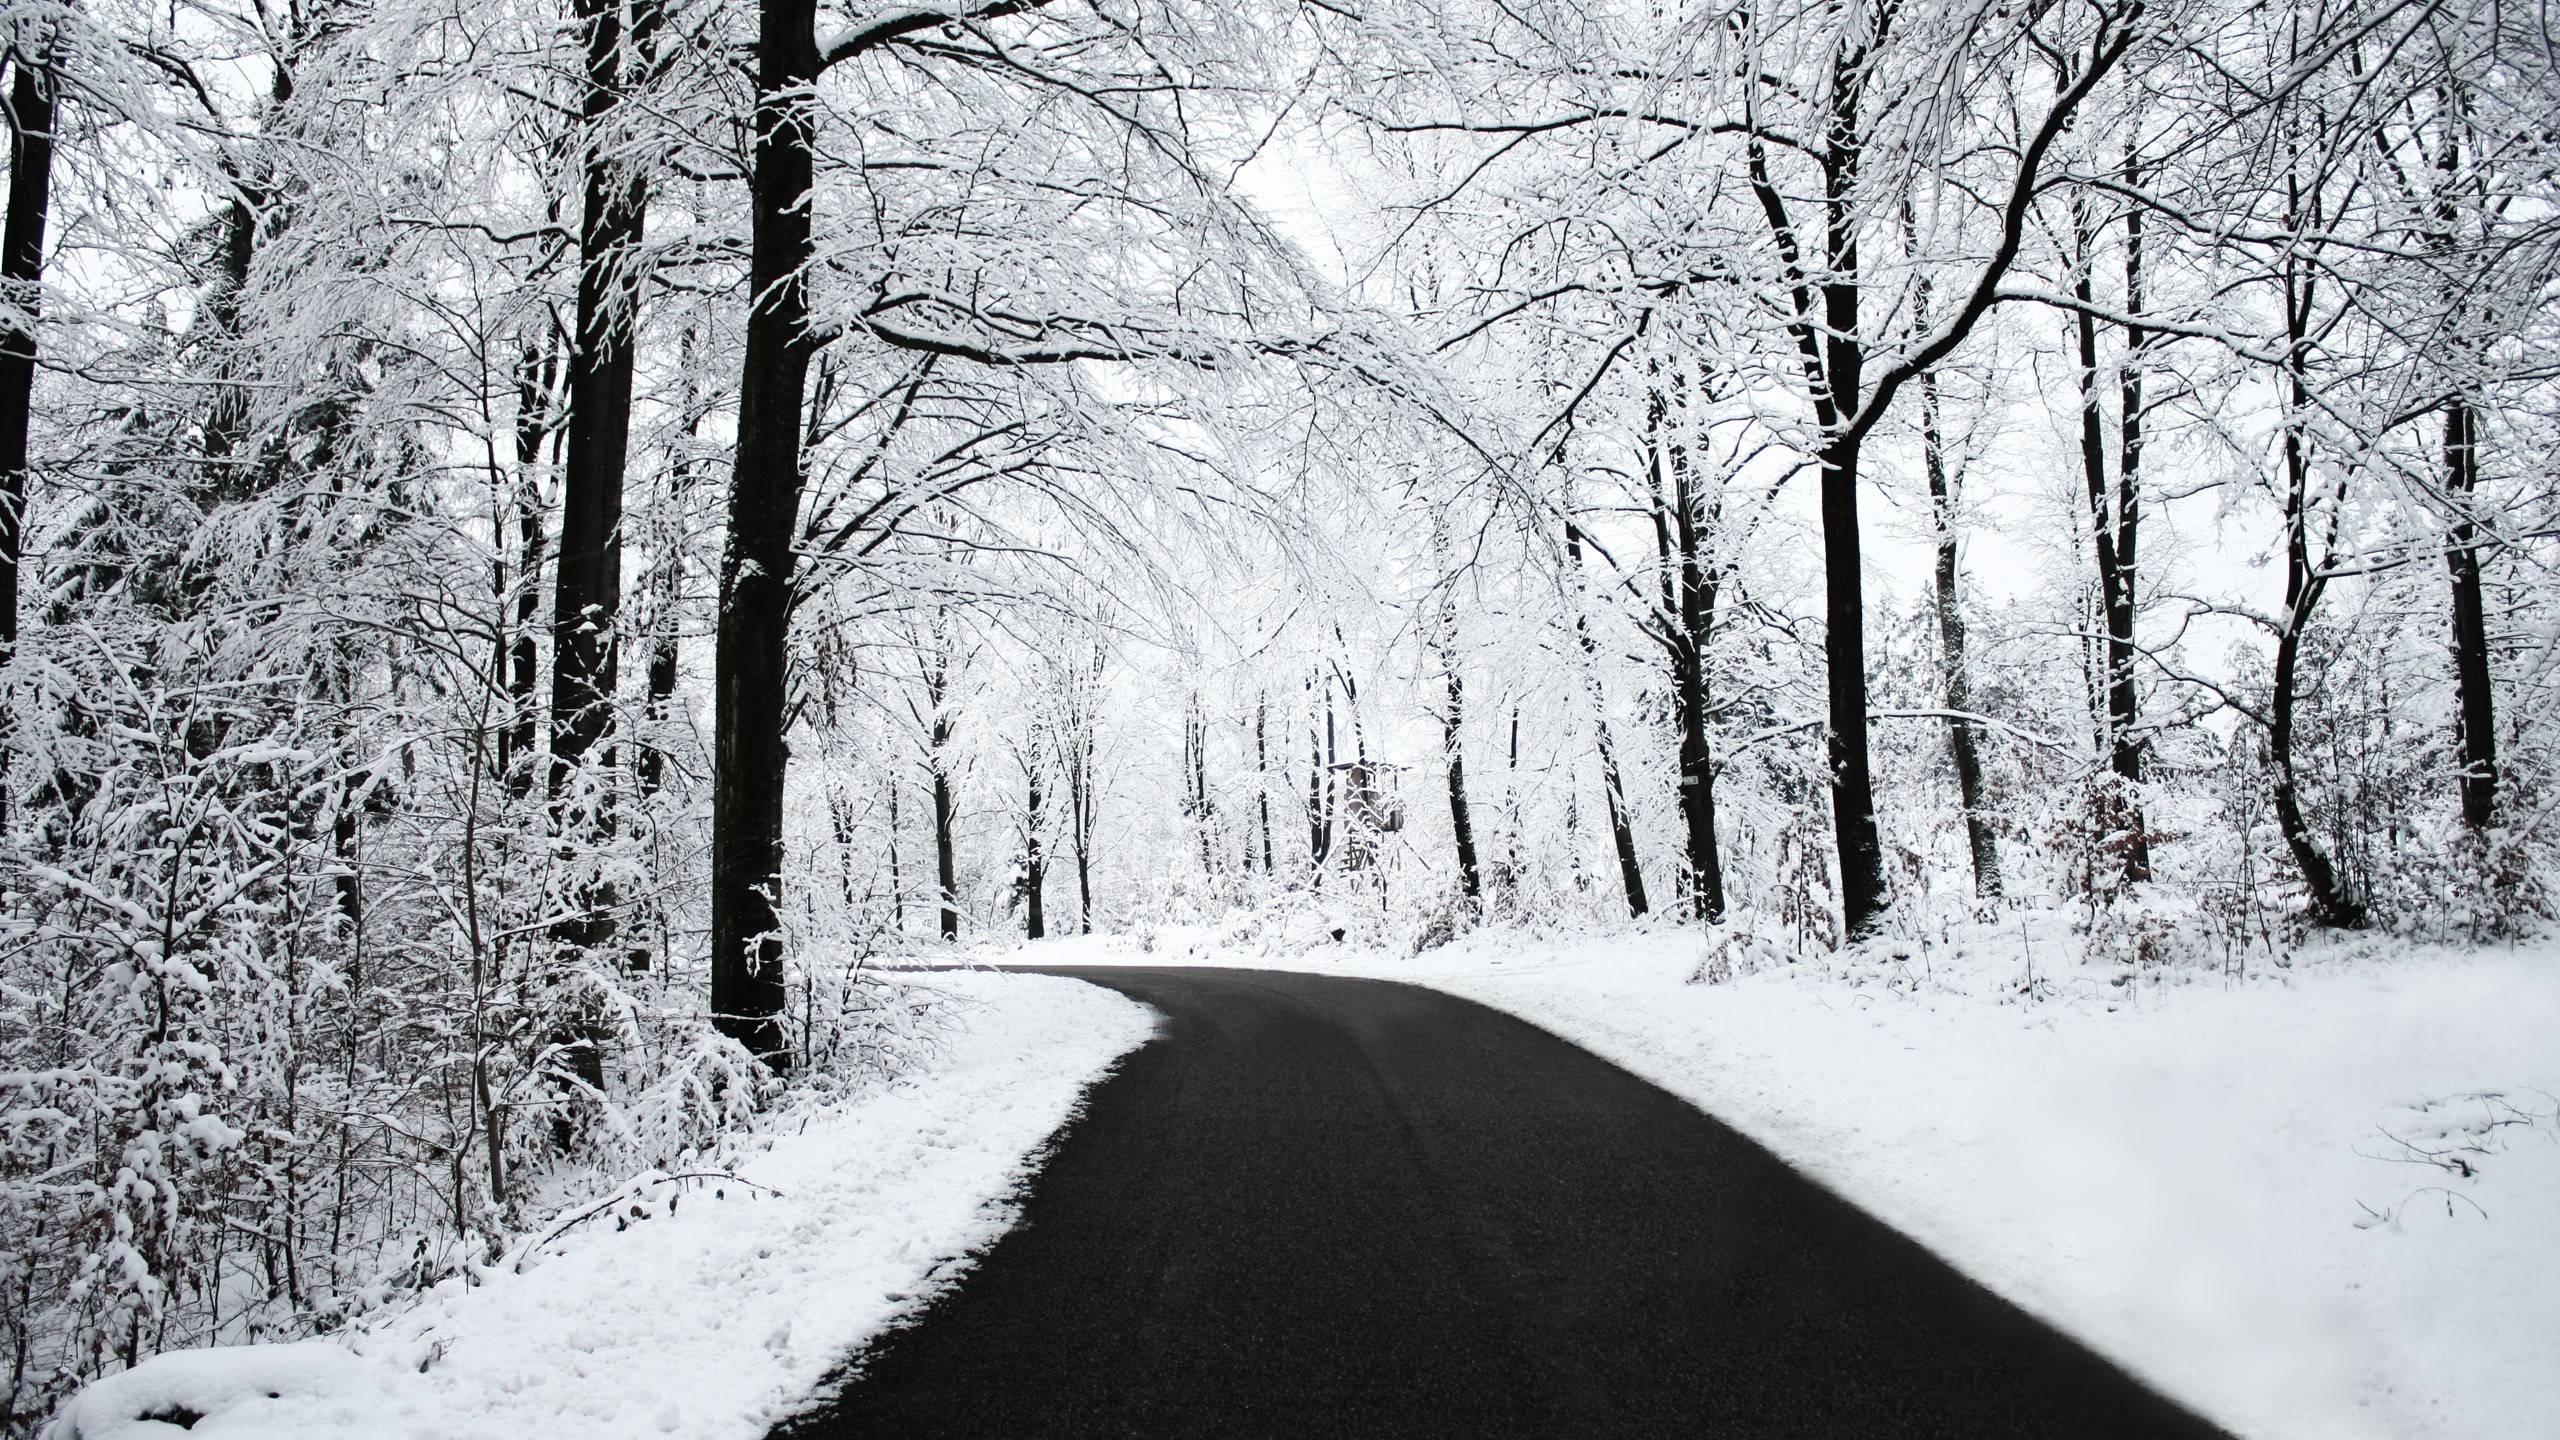 Road Through The Snowy Forest Wallpapers 2560x1440PX ~ Wallpapers